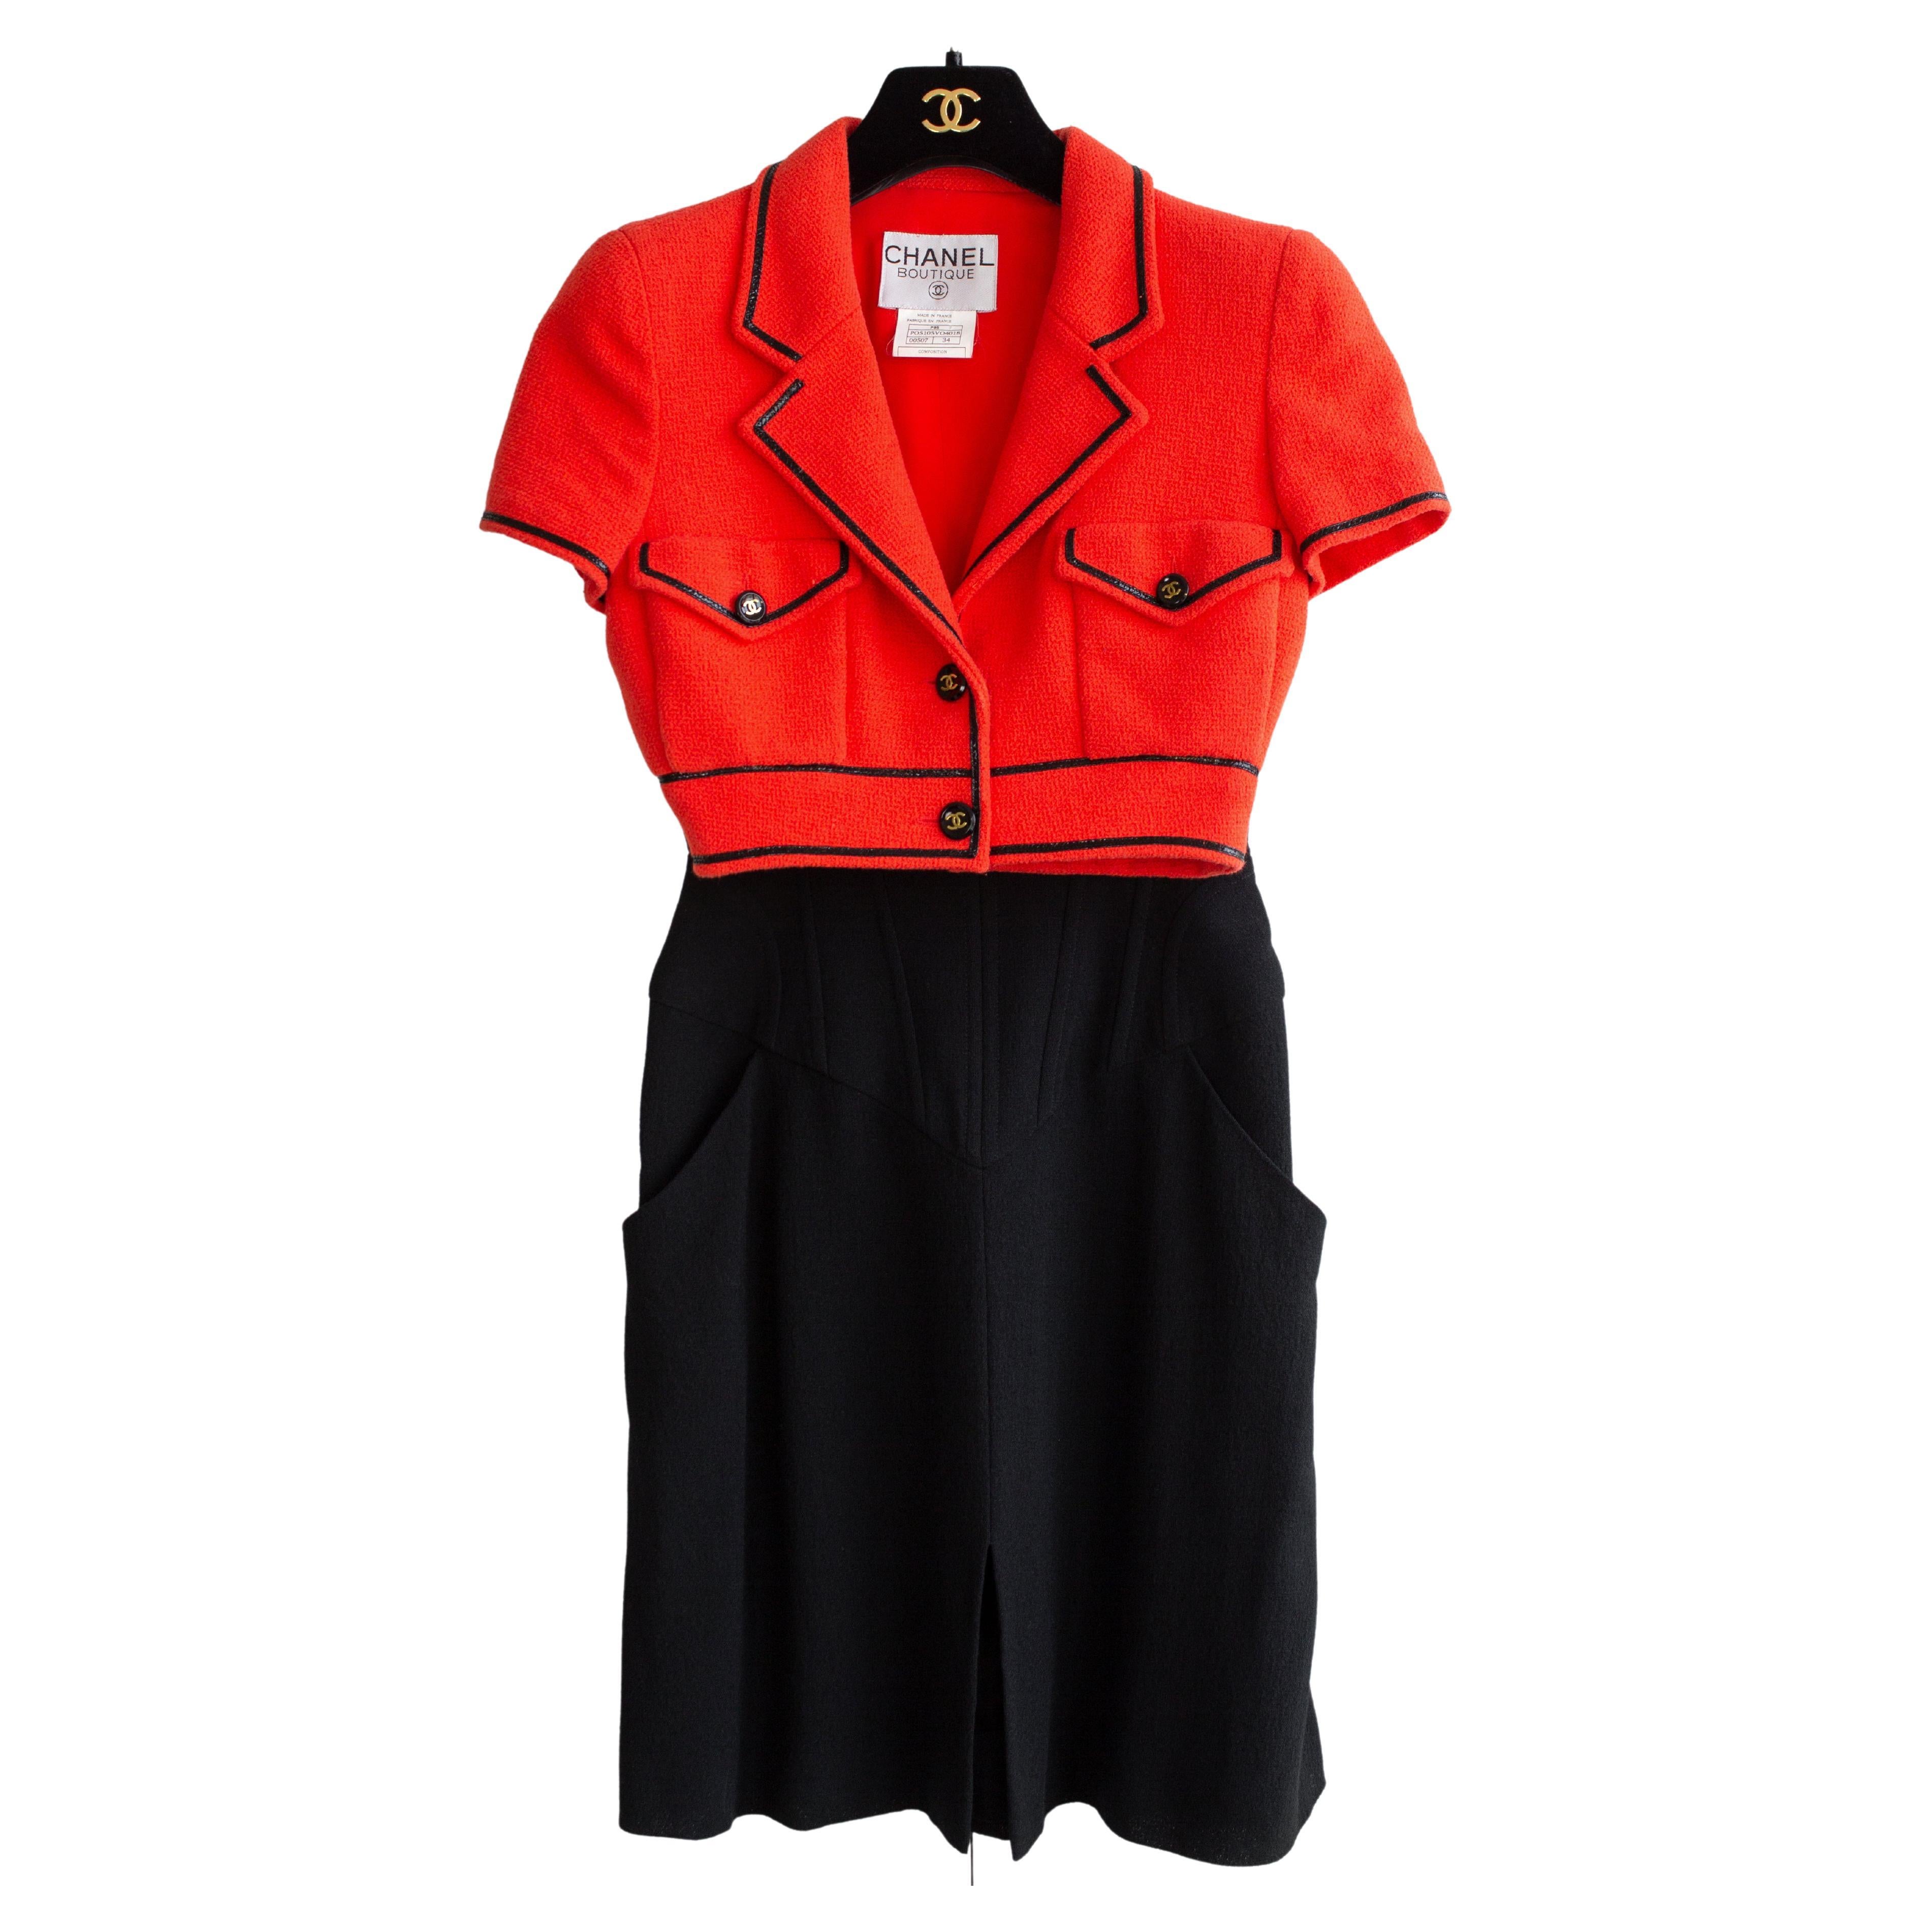 Chanel Collection Jacket and Skirt Set 95P